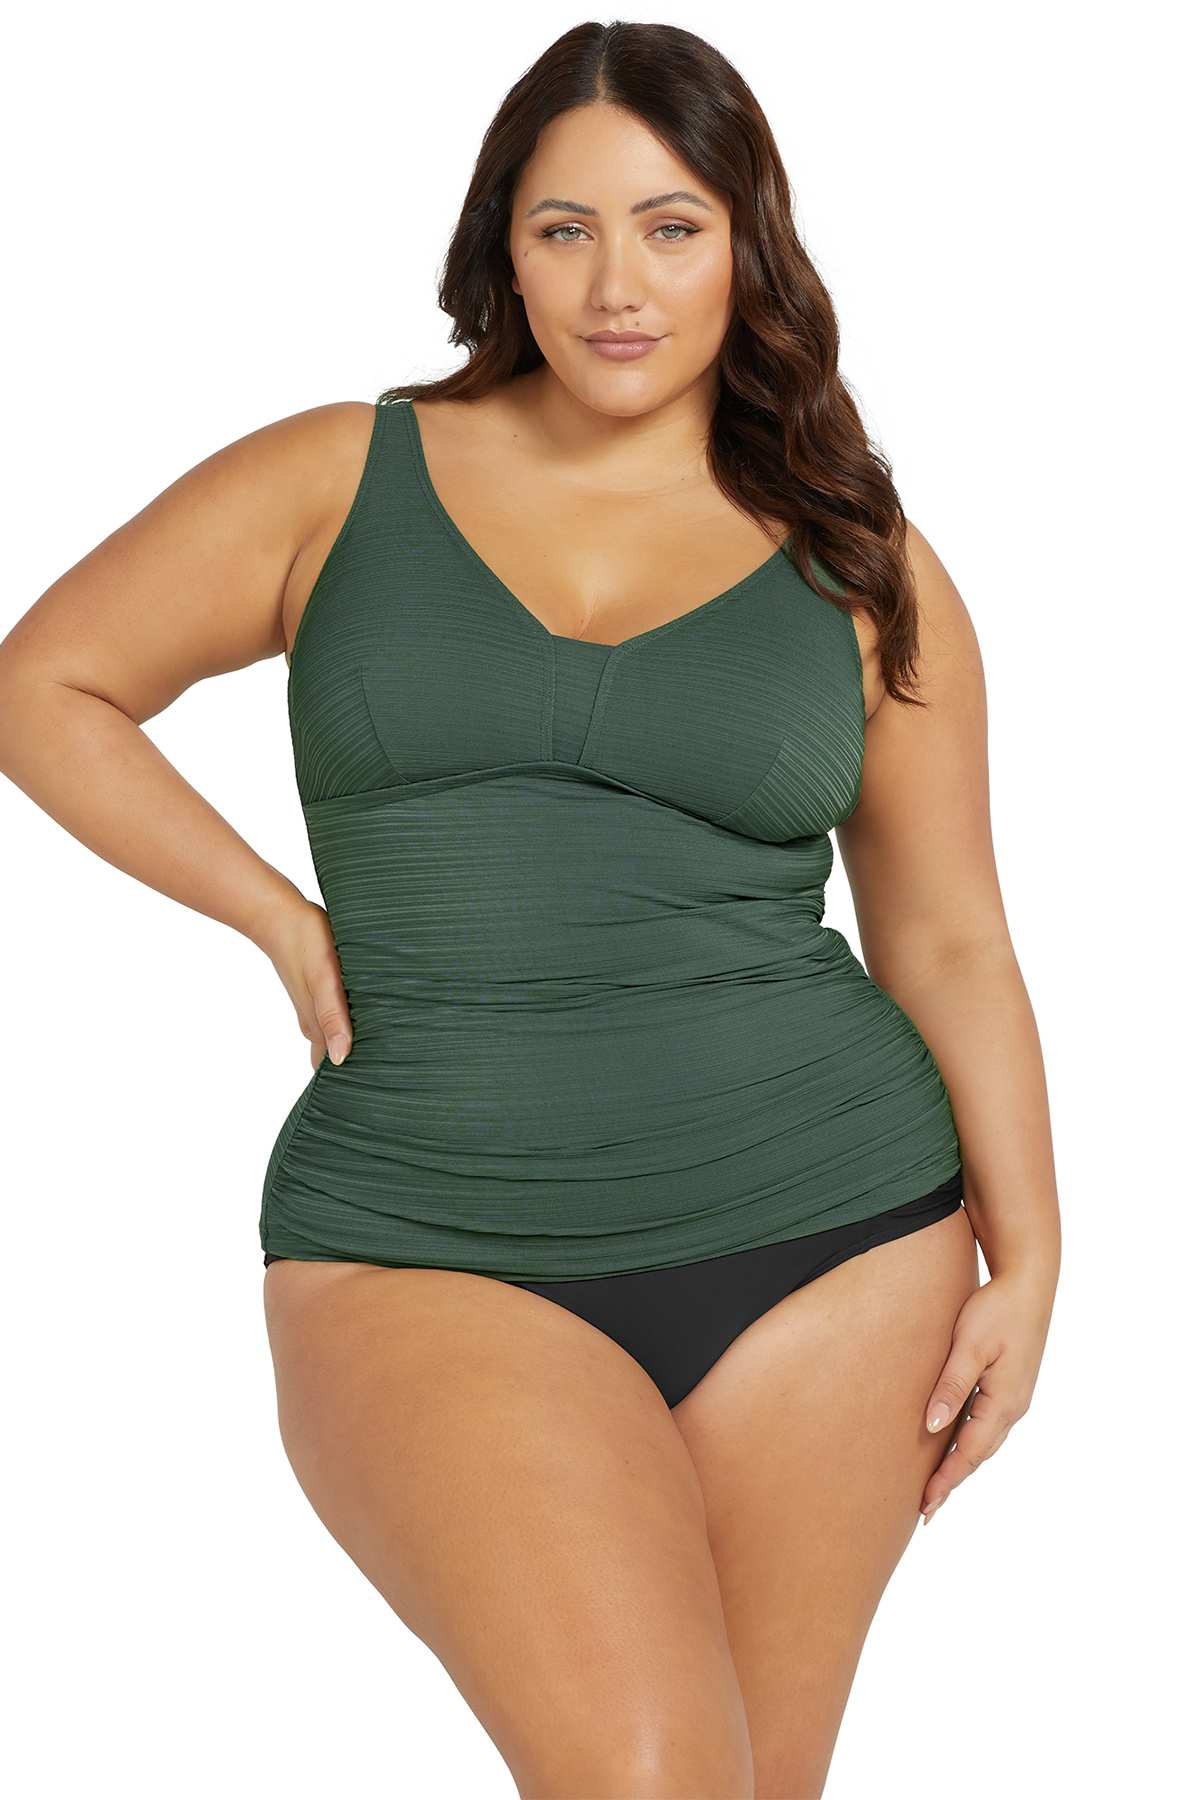 Curve Muse Women's Plus Size Add 1 Cup Push Up Nigeria